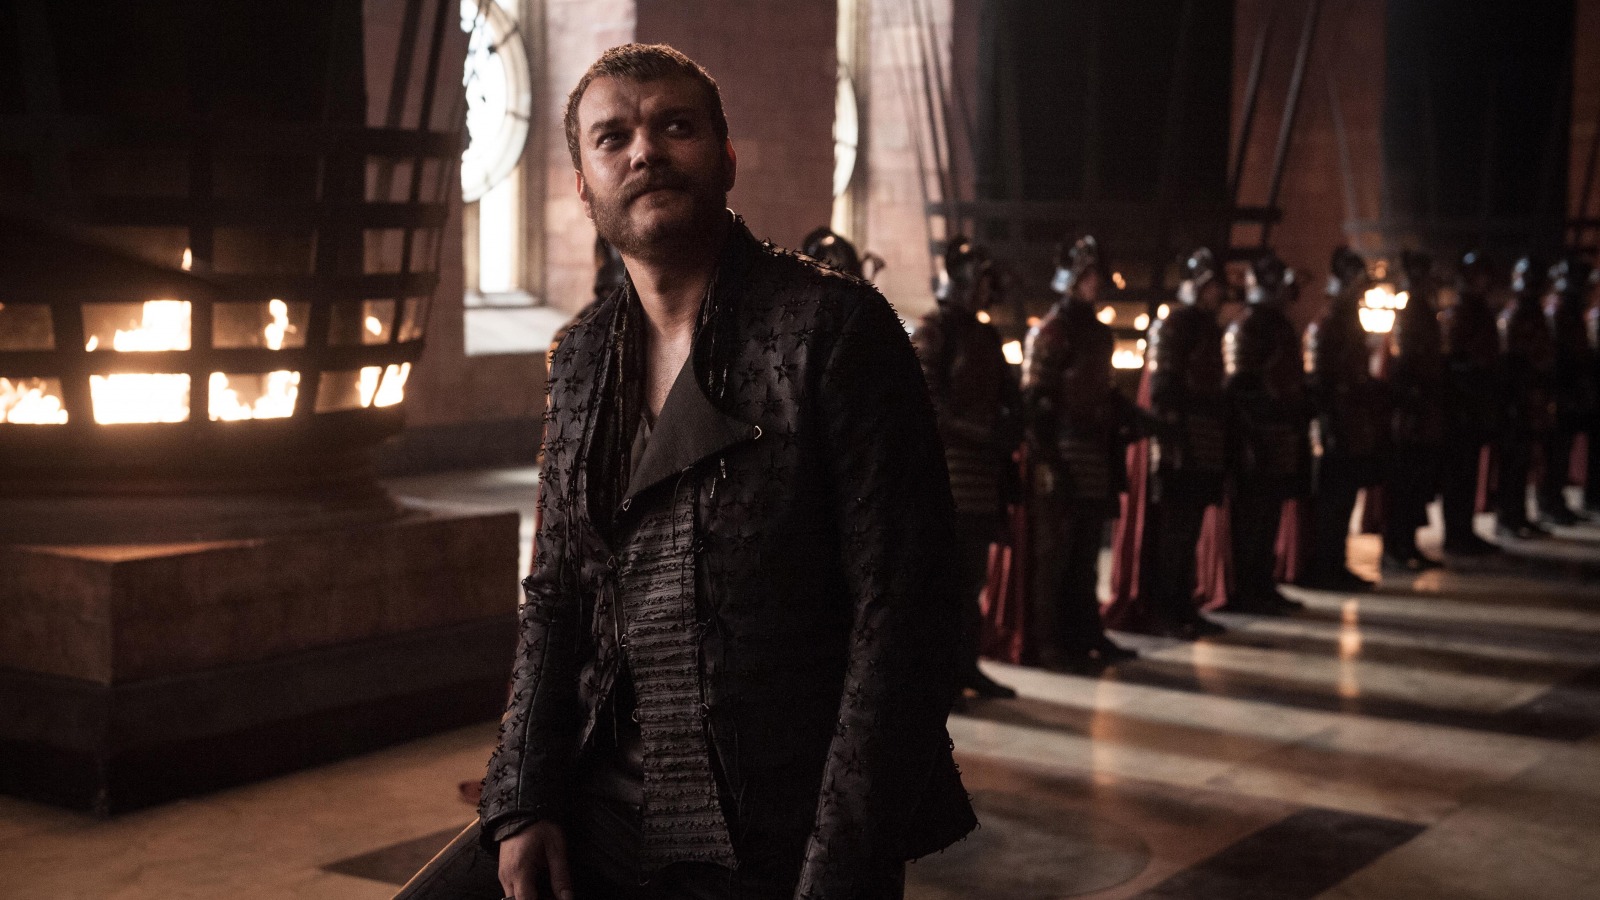 Why Euron Greyjoy changed so much on Game of Thrones